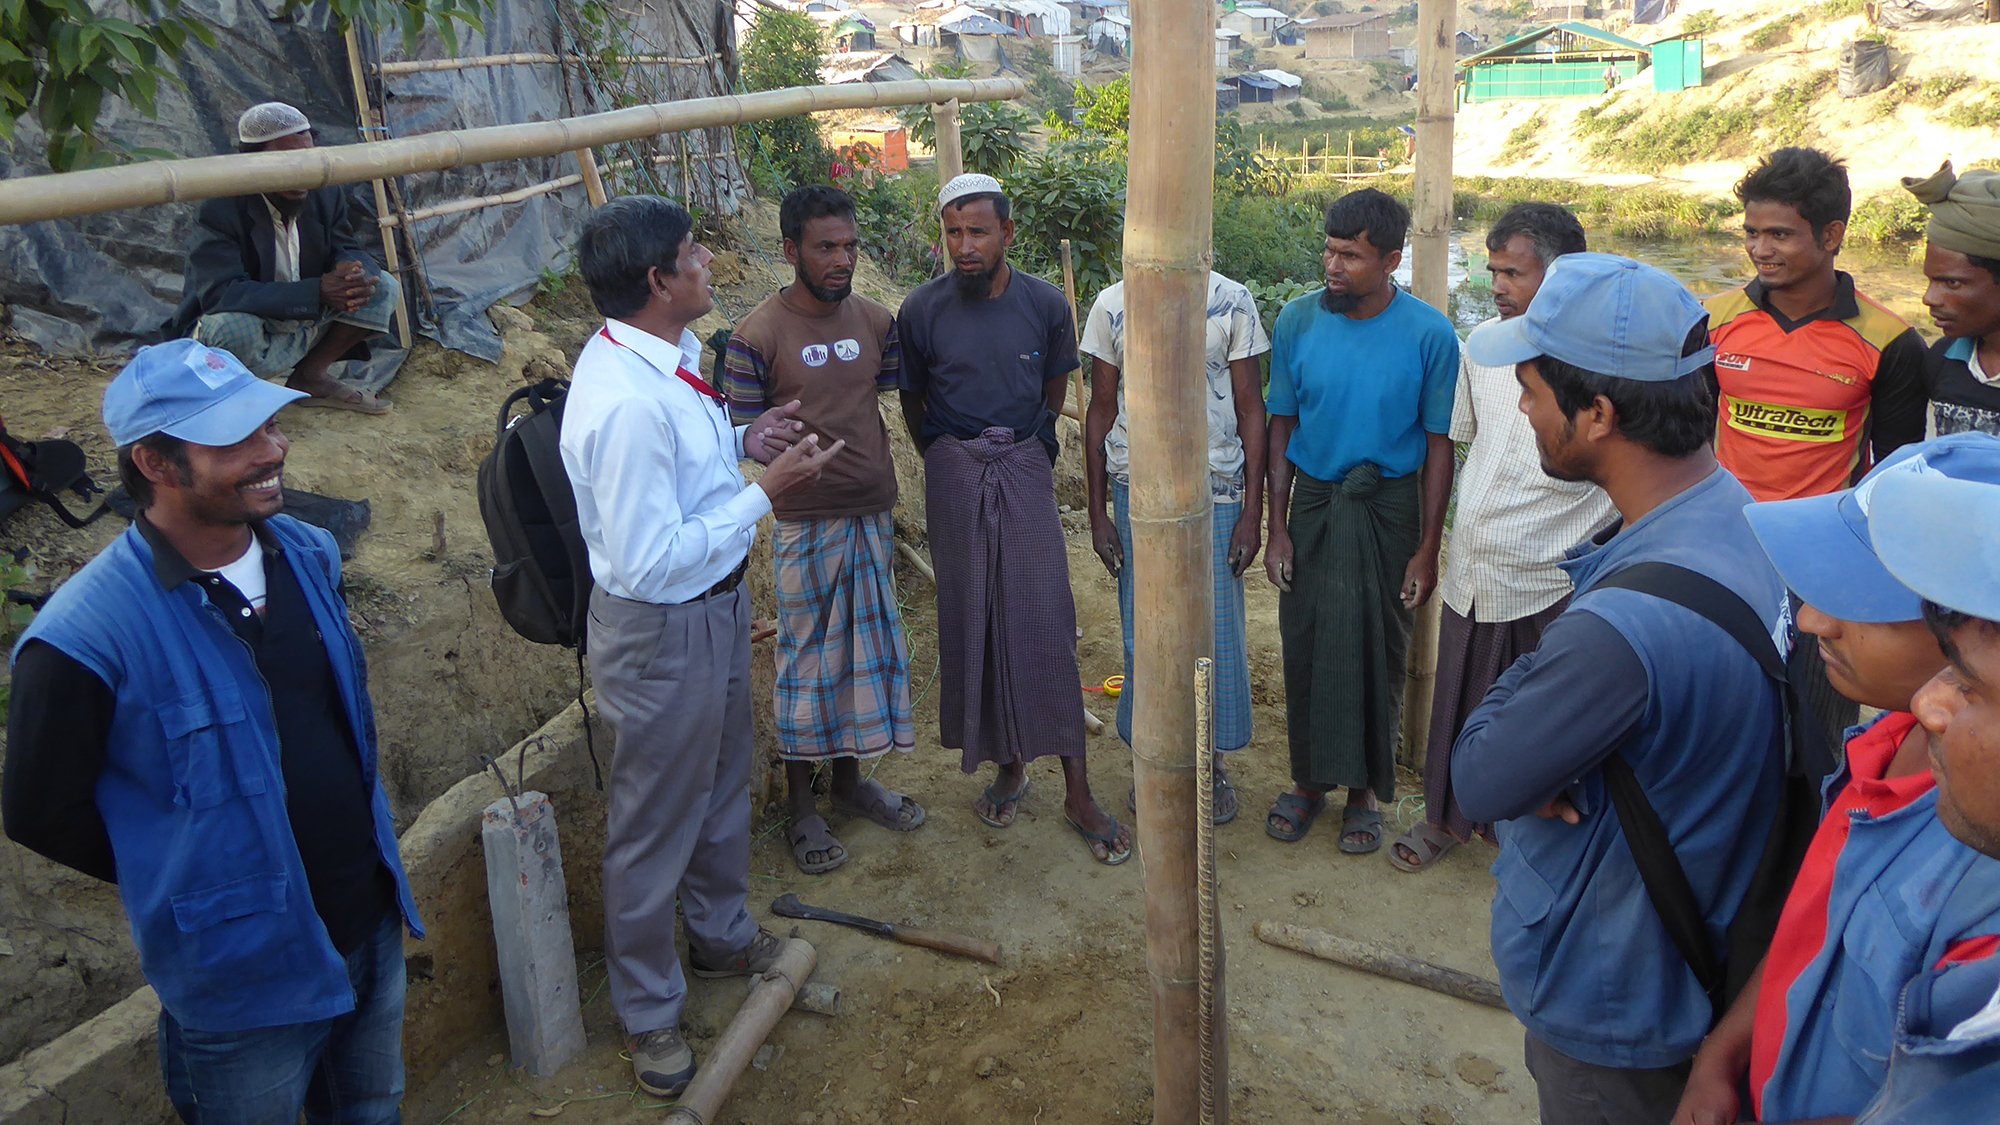 Workshop on site on model shelter construction using bamboo